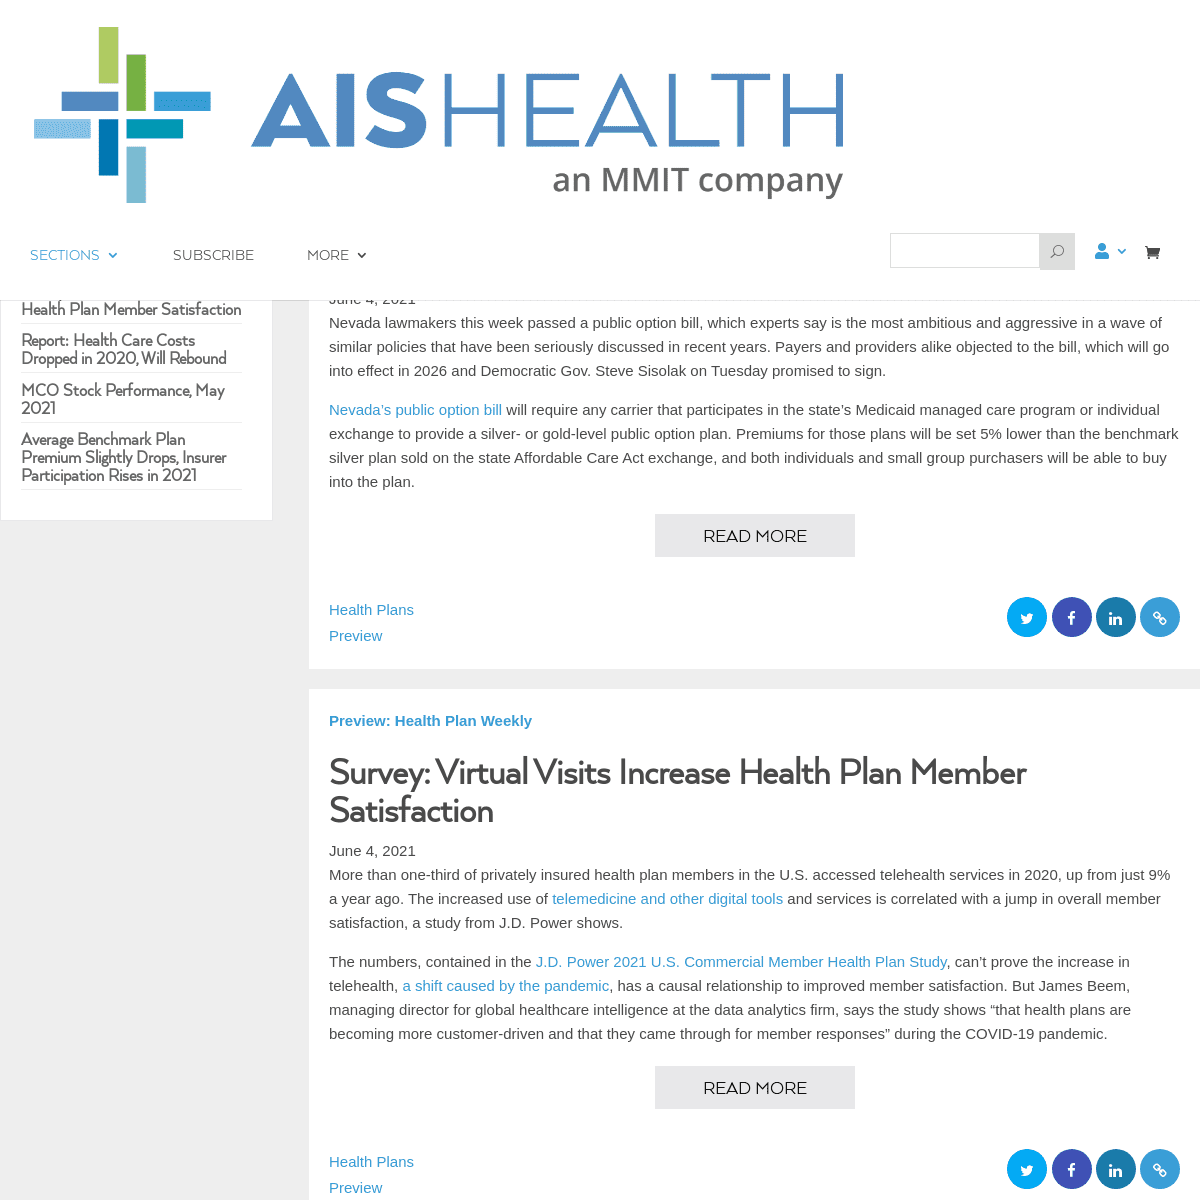 A complete backup of https://aishealth.com